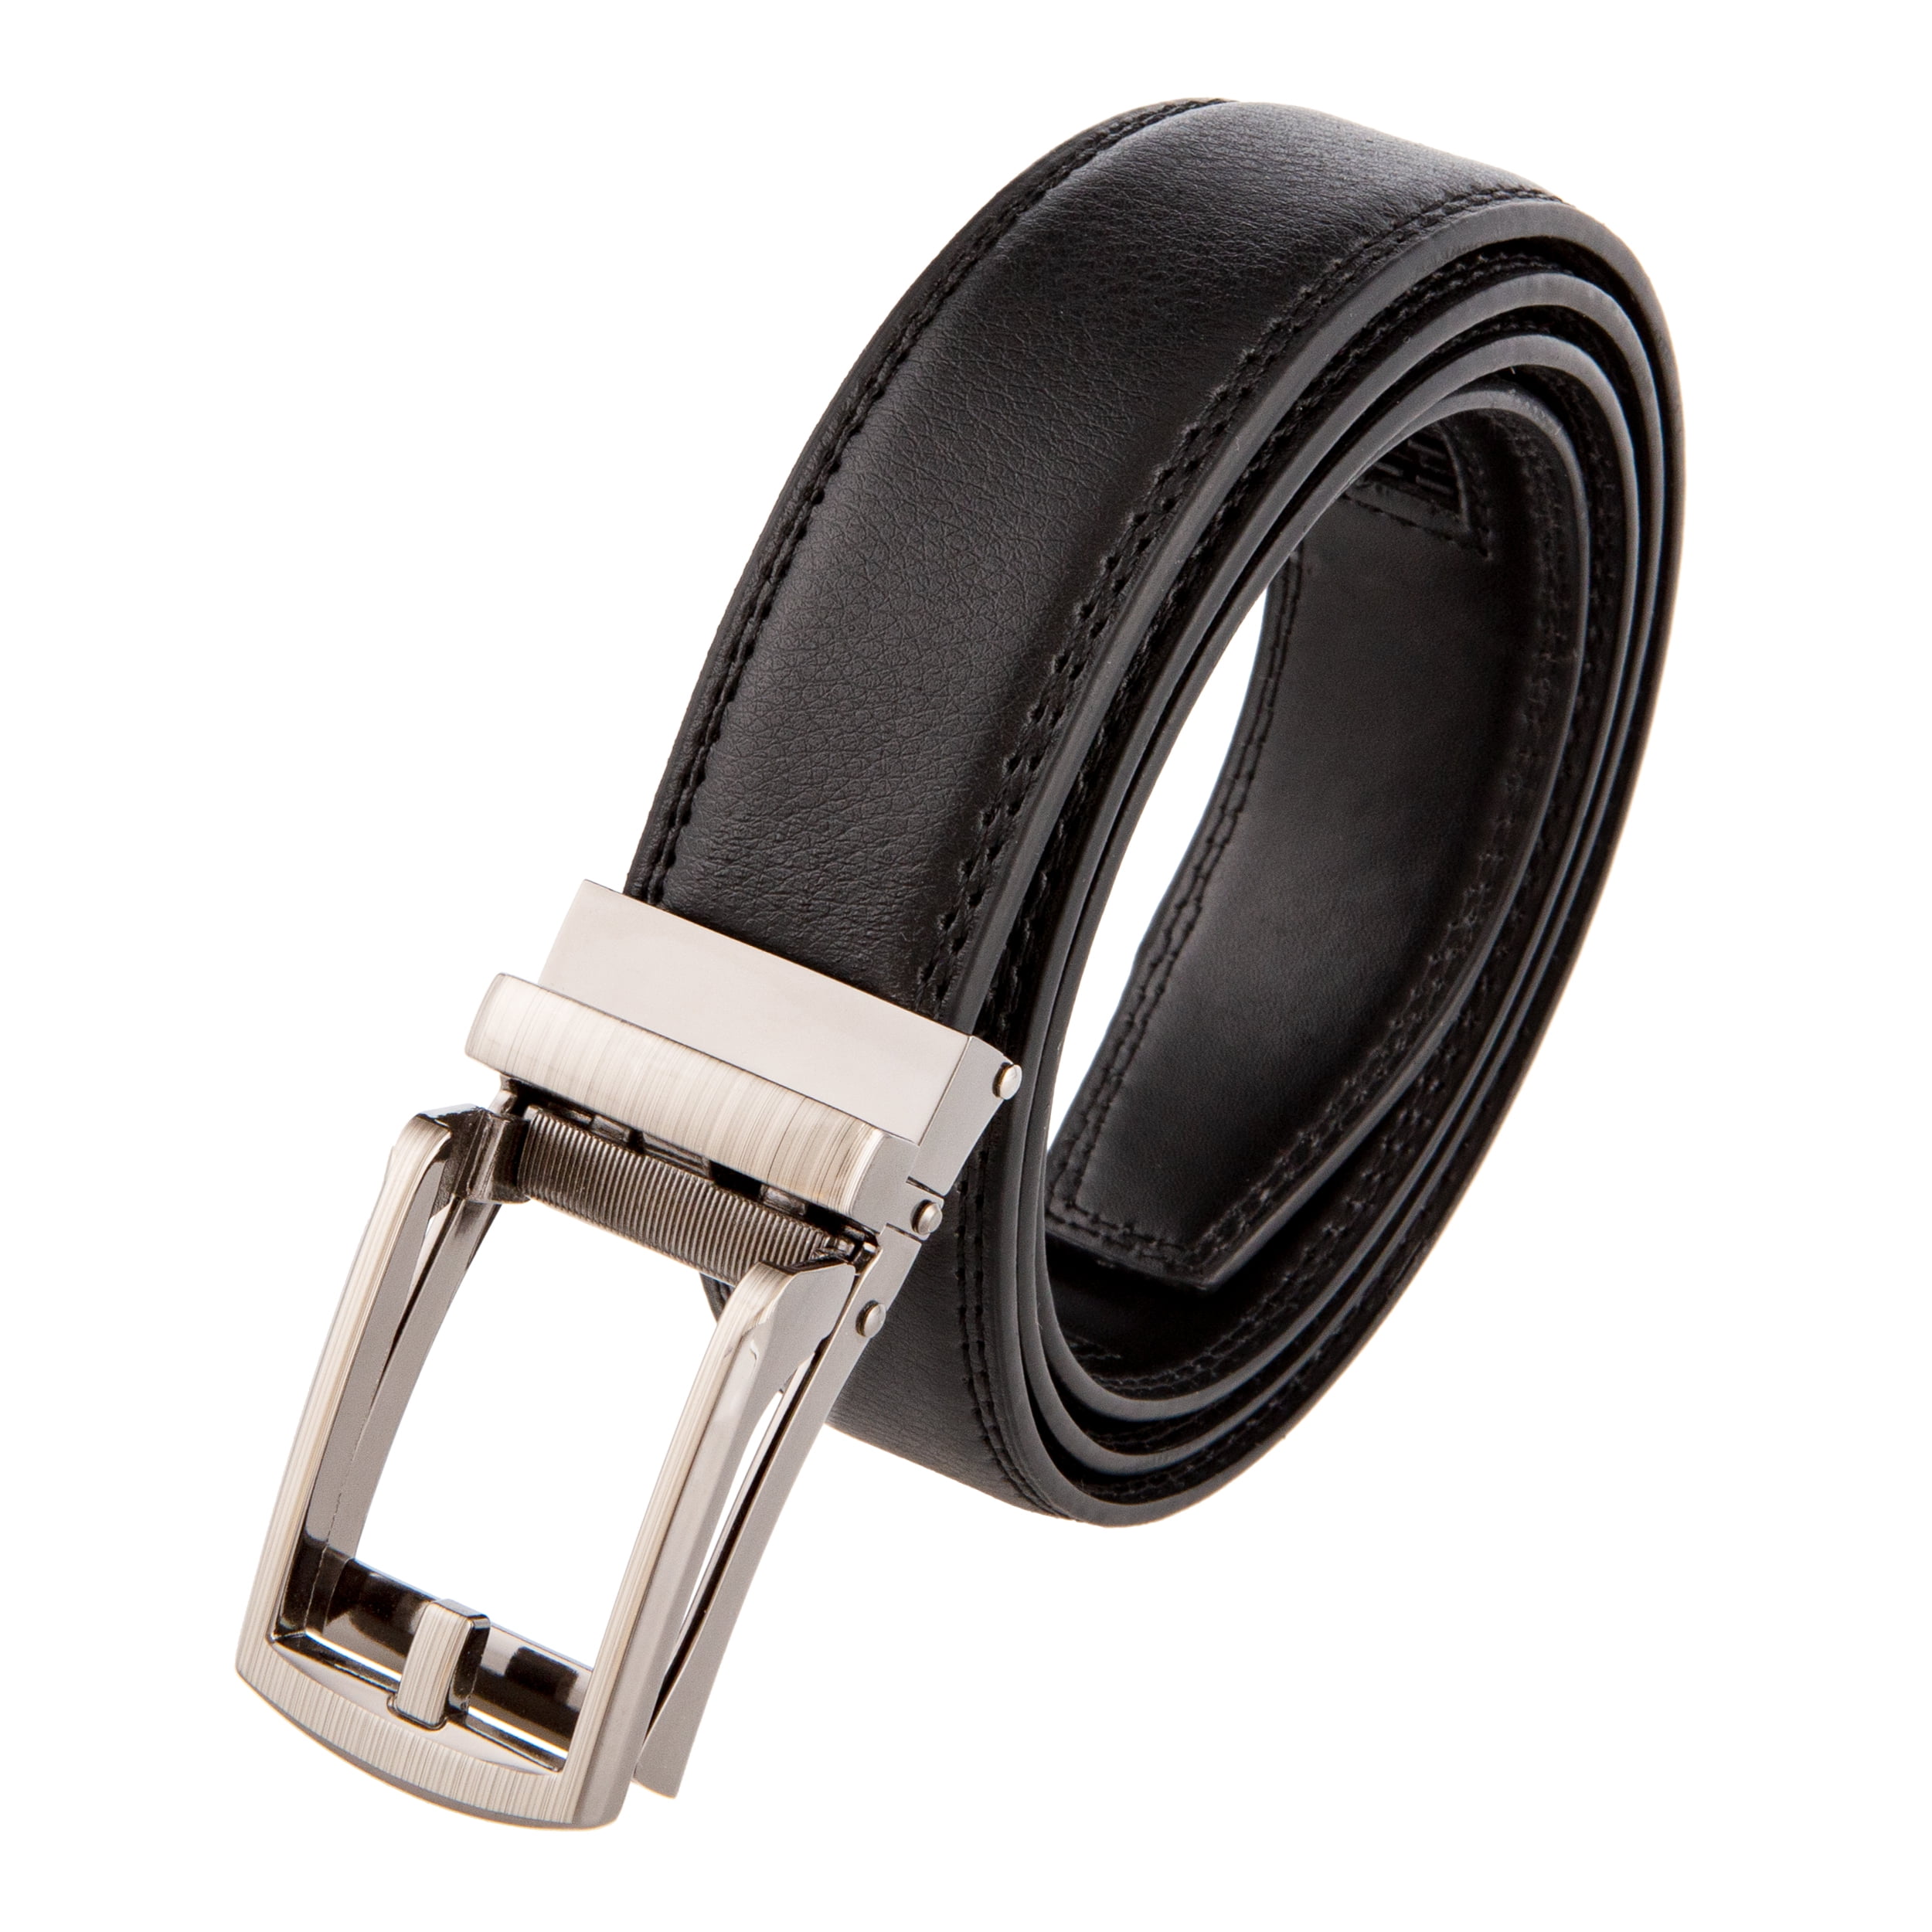 Men's belt Leather Dress Belt Comfort Click Automatic Lock New buckle up to 43" 